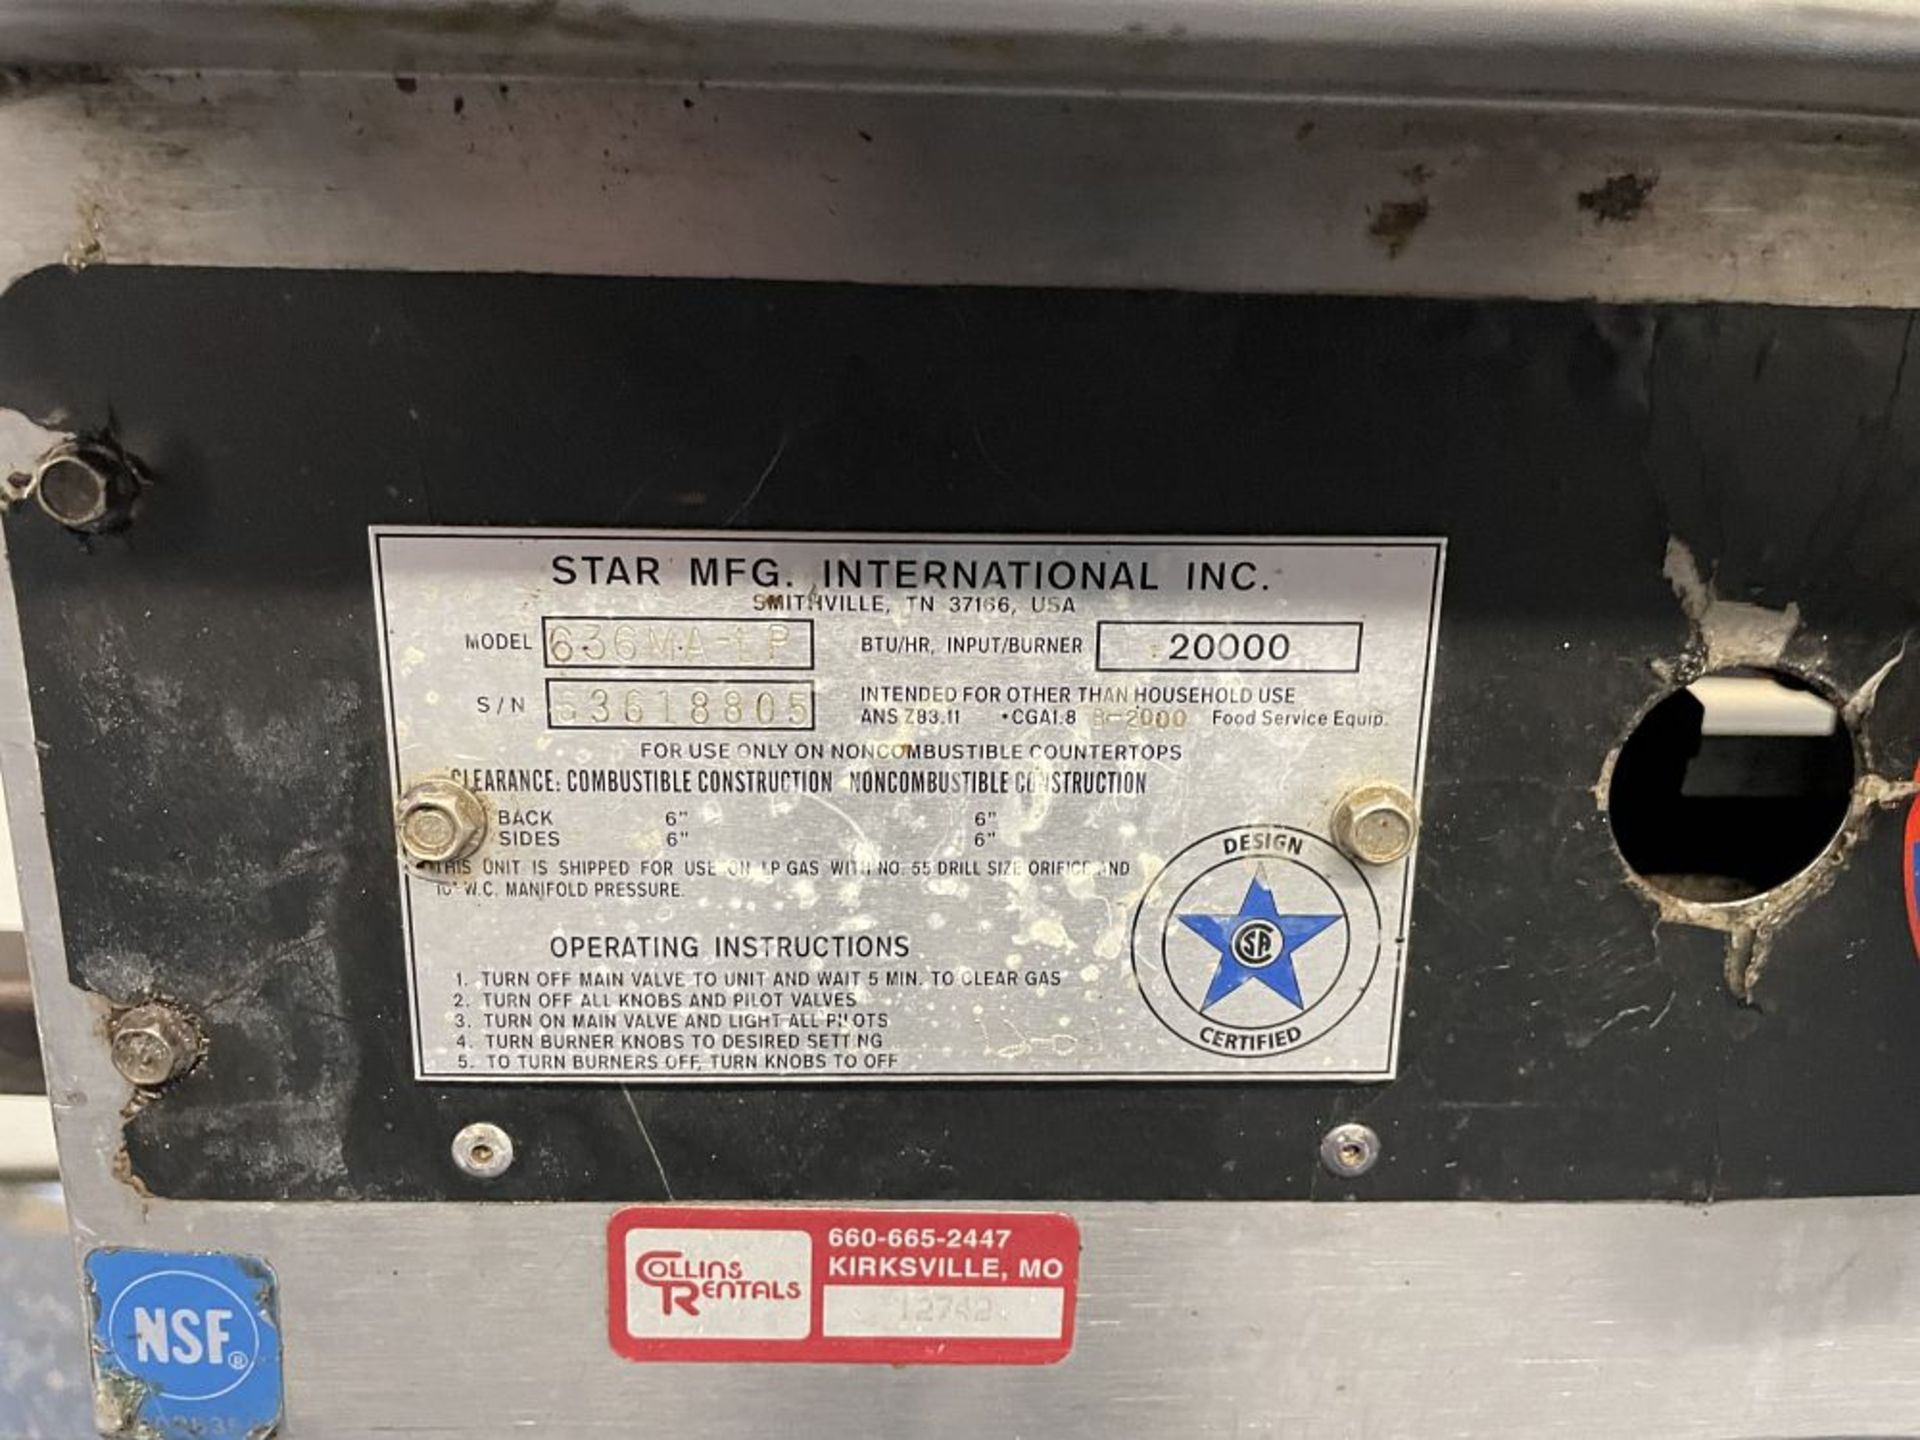 STAR MFG. 3' GRIDDLE, MDL 636MA-1P, 20"X36" - Image 2 of 2